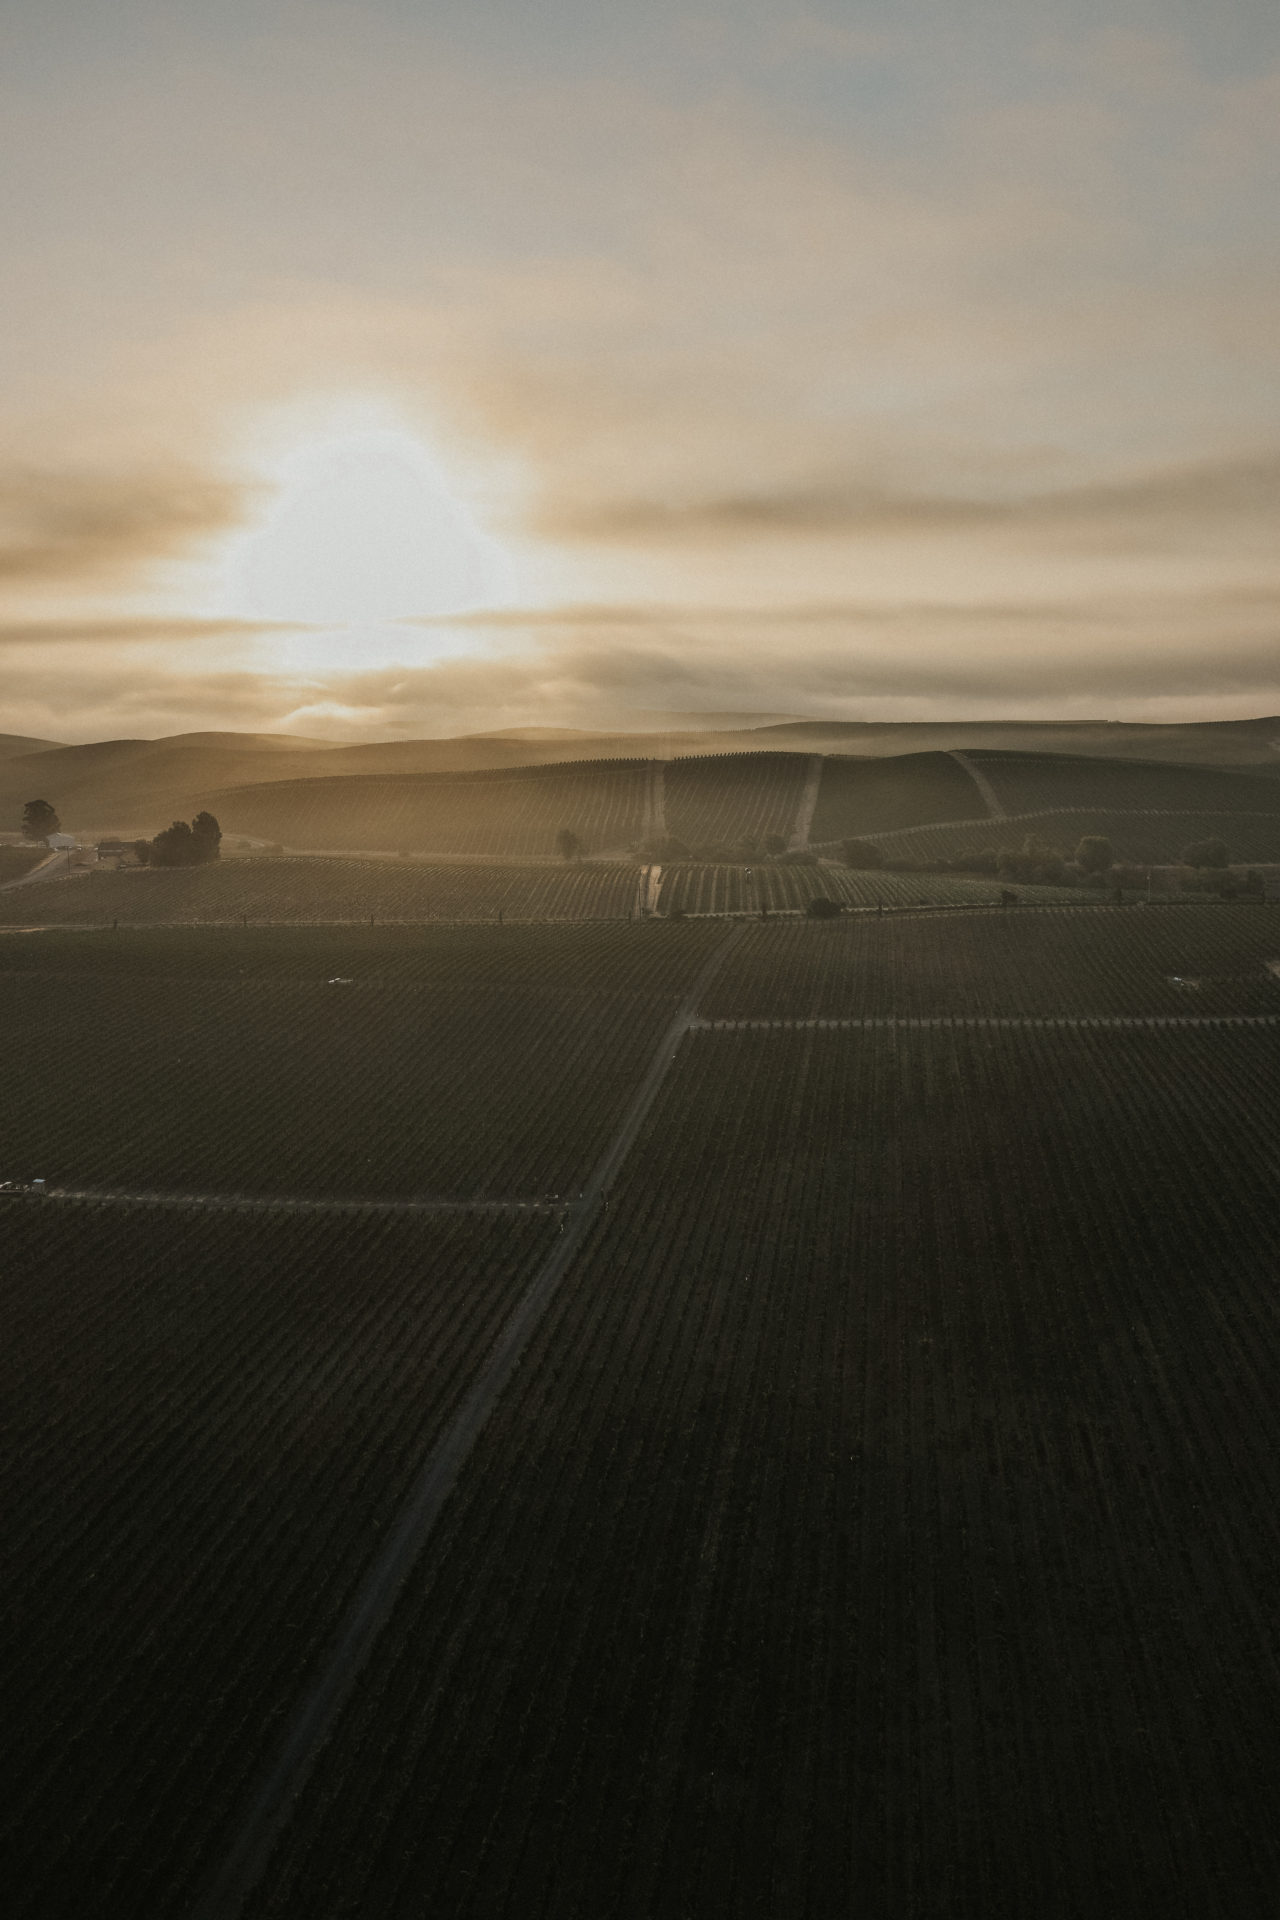 the view of Sonoma from inside a hot air balloon